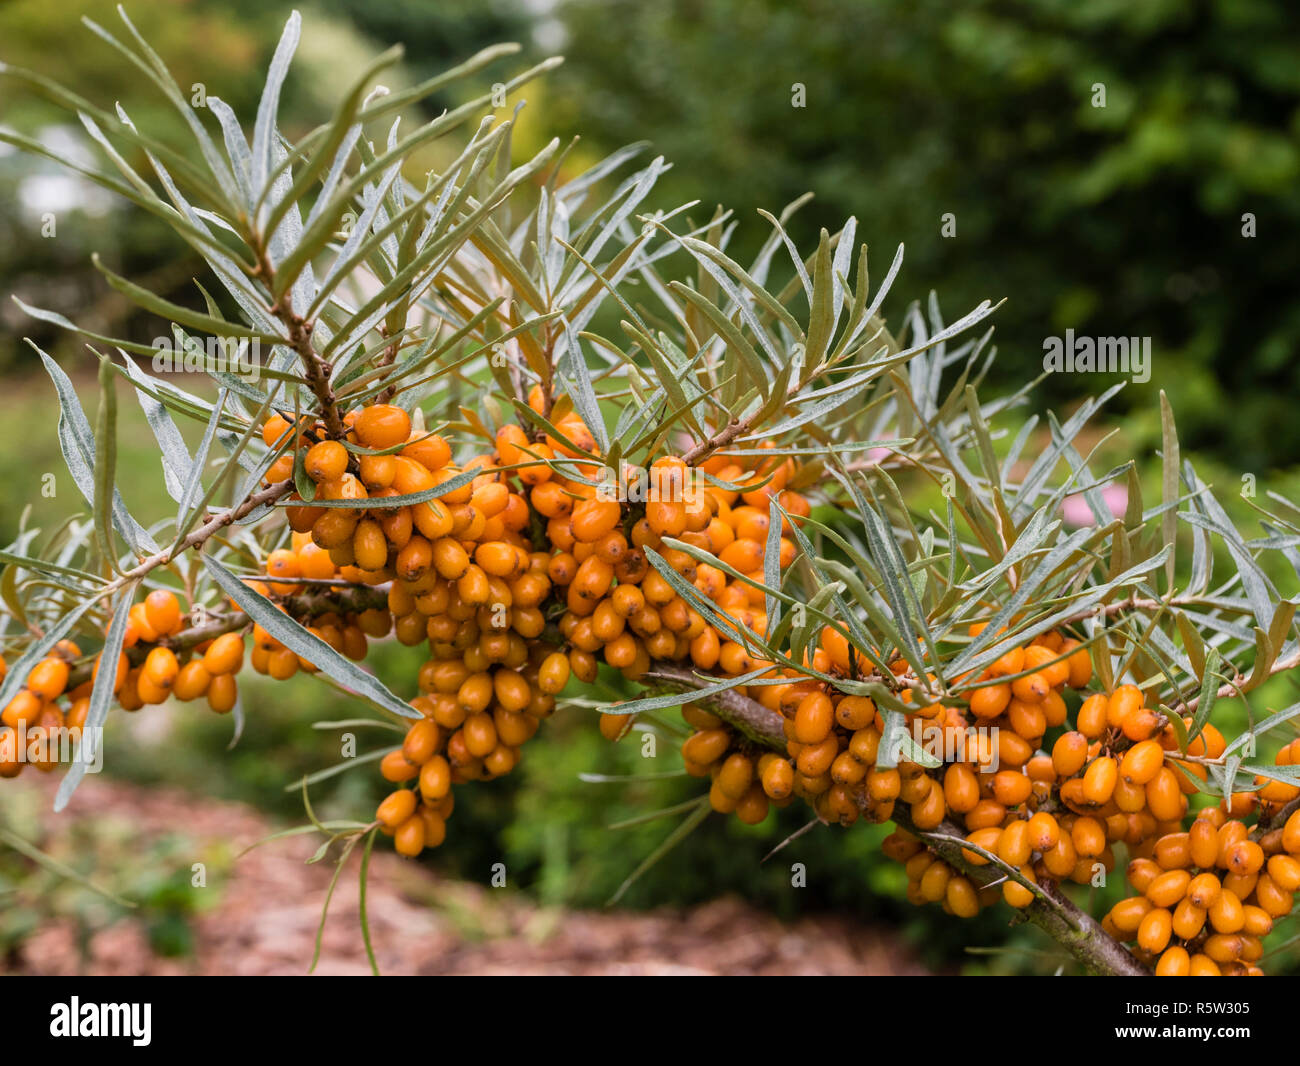 sea buckthorn with fruits Stock Photo